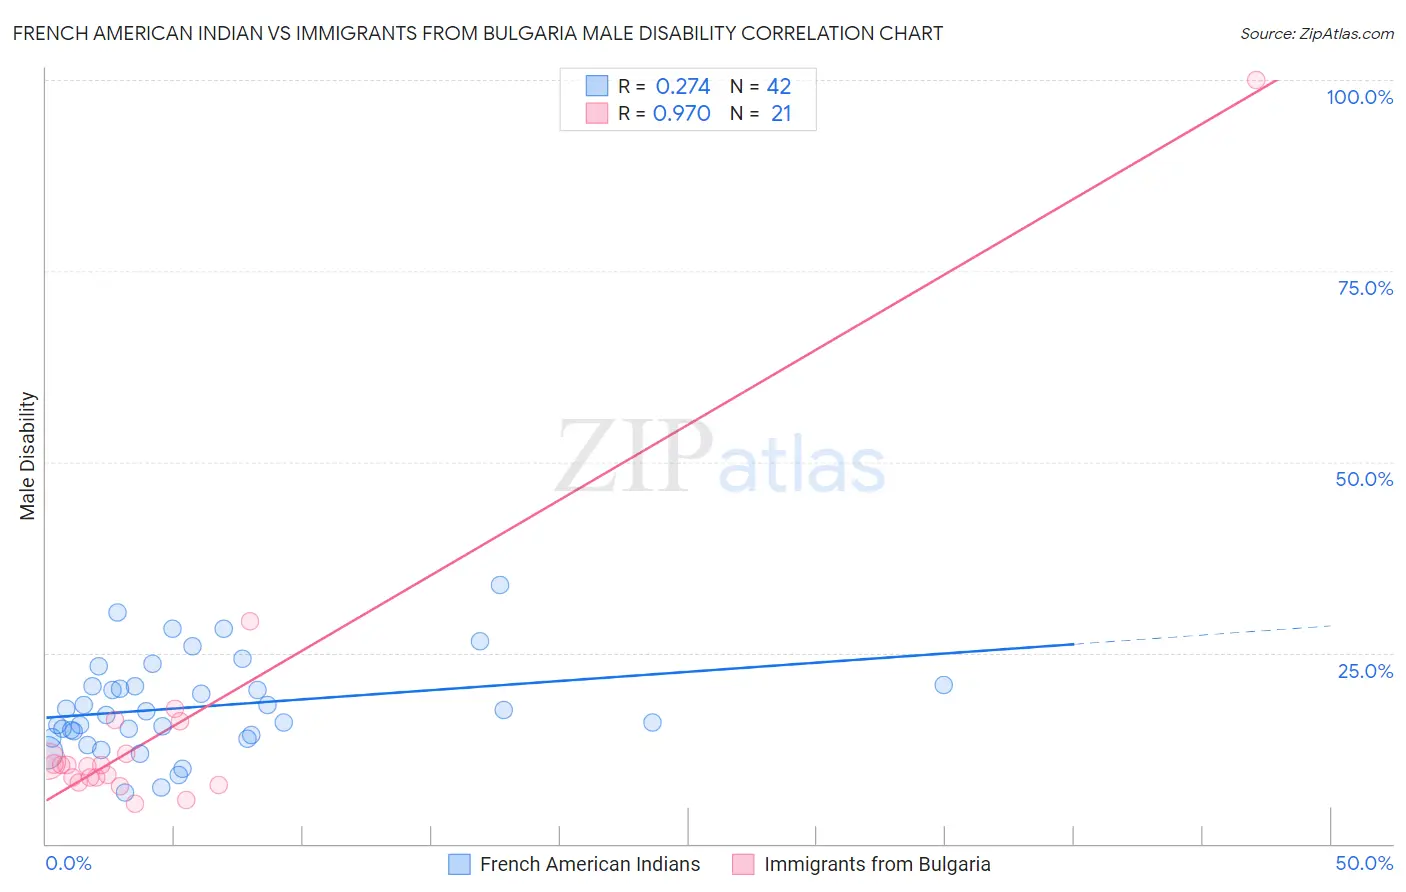 French American Indian vs Immigrants from Bulgaria Male Disability